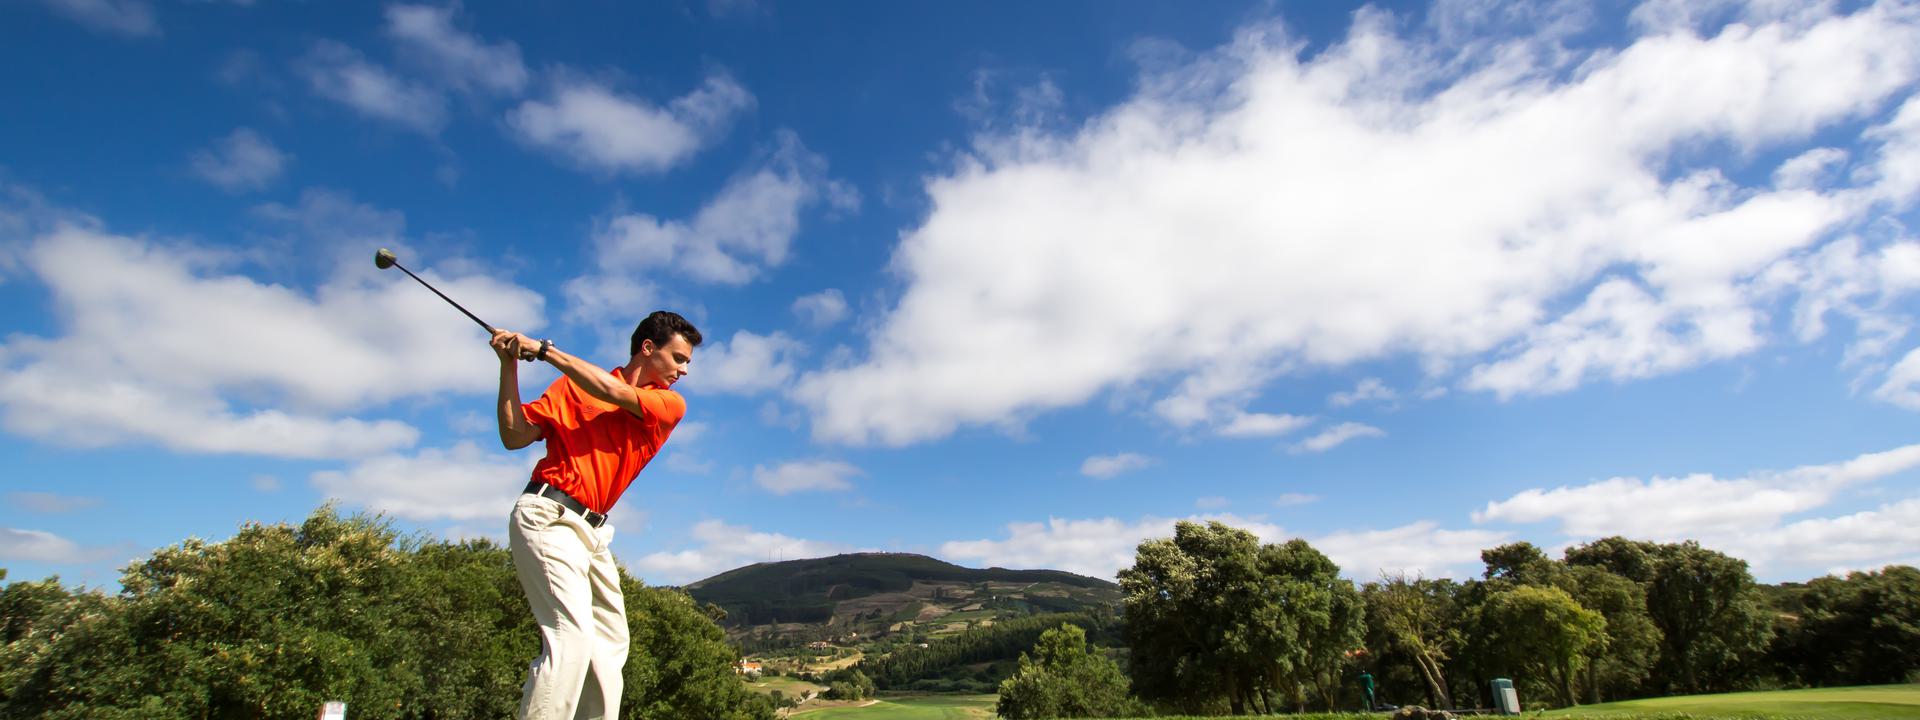 6 best golf courses in Center of Portugal: a top-tier list of prestigious golfing destinations